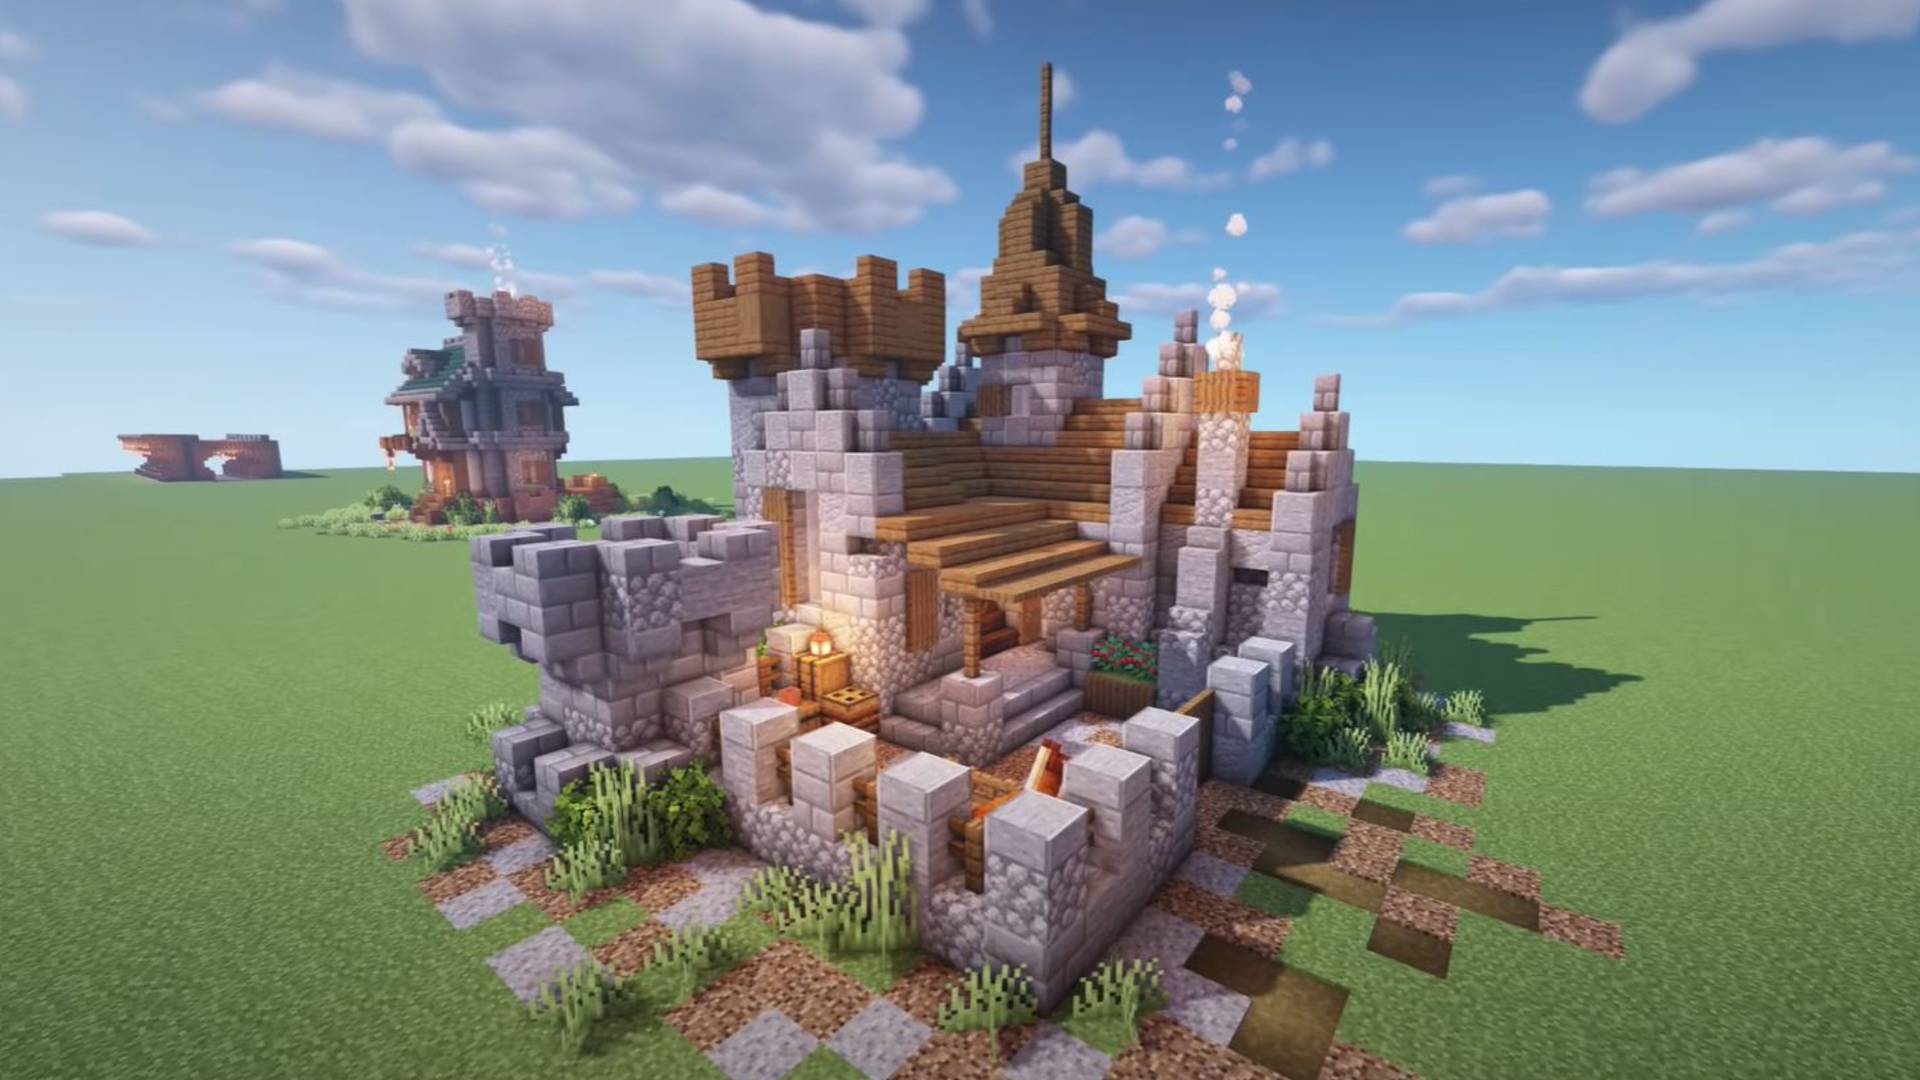 How to build a small castle in minecraft